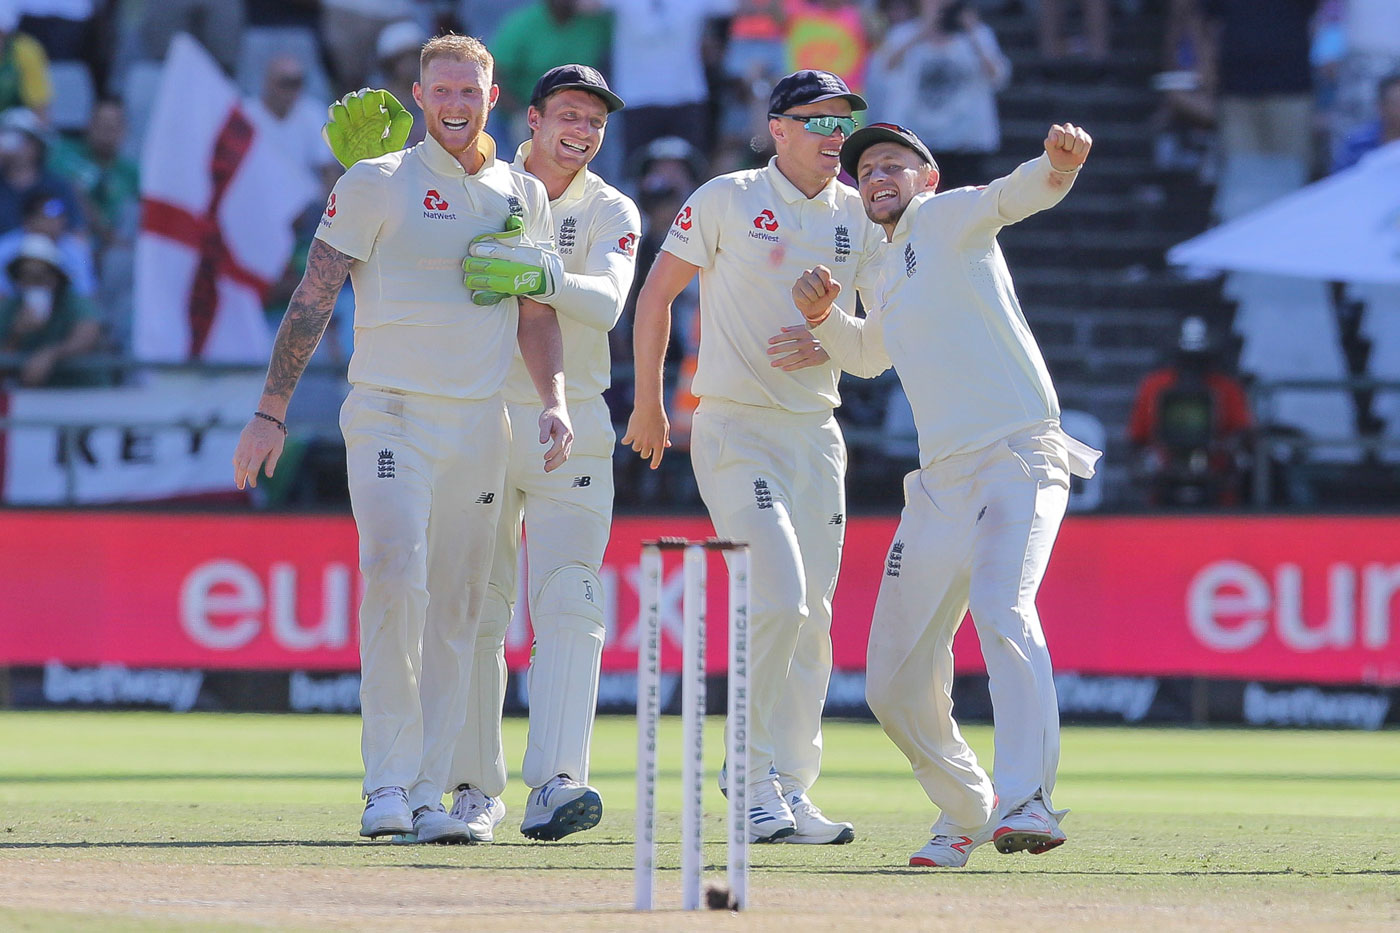 England's player celebrate after defeating South Africa at the Newlands Cricket Stadium in Cape Town, South Africa on Tuesday